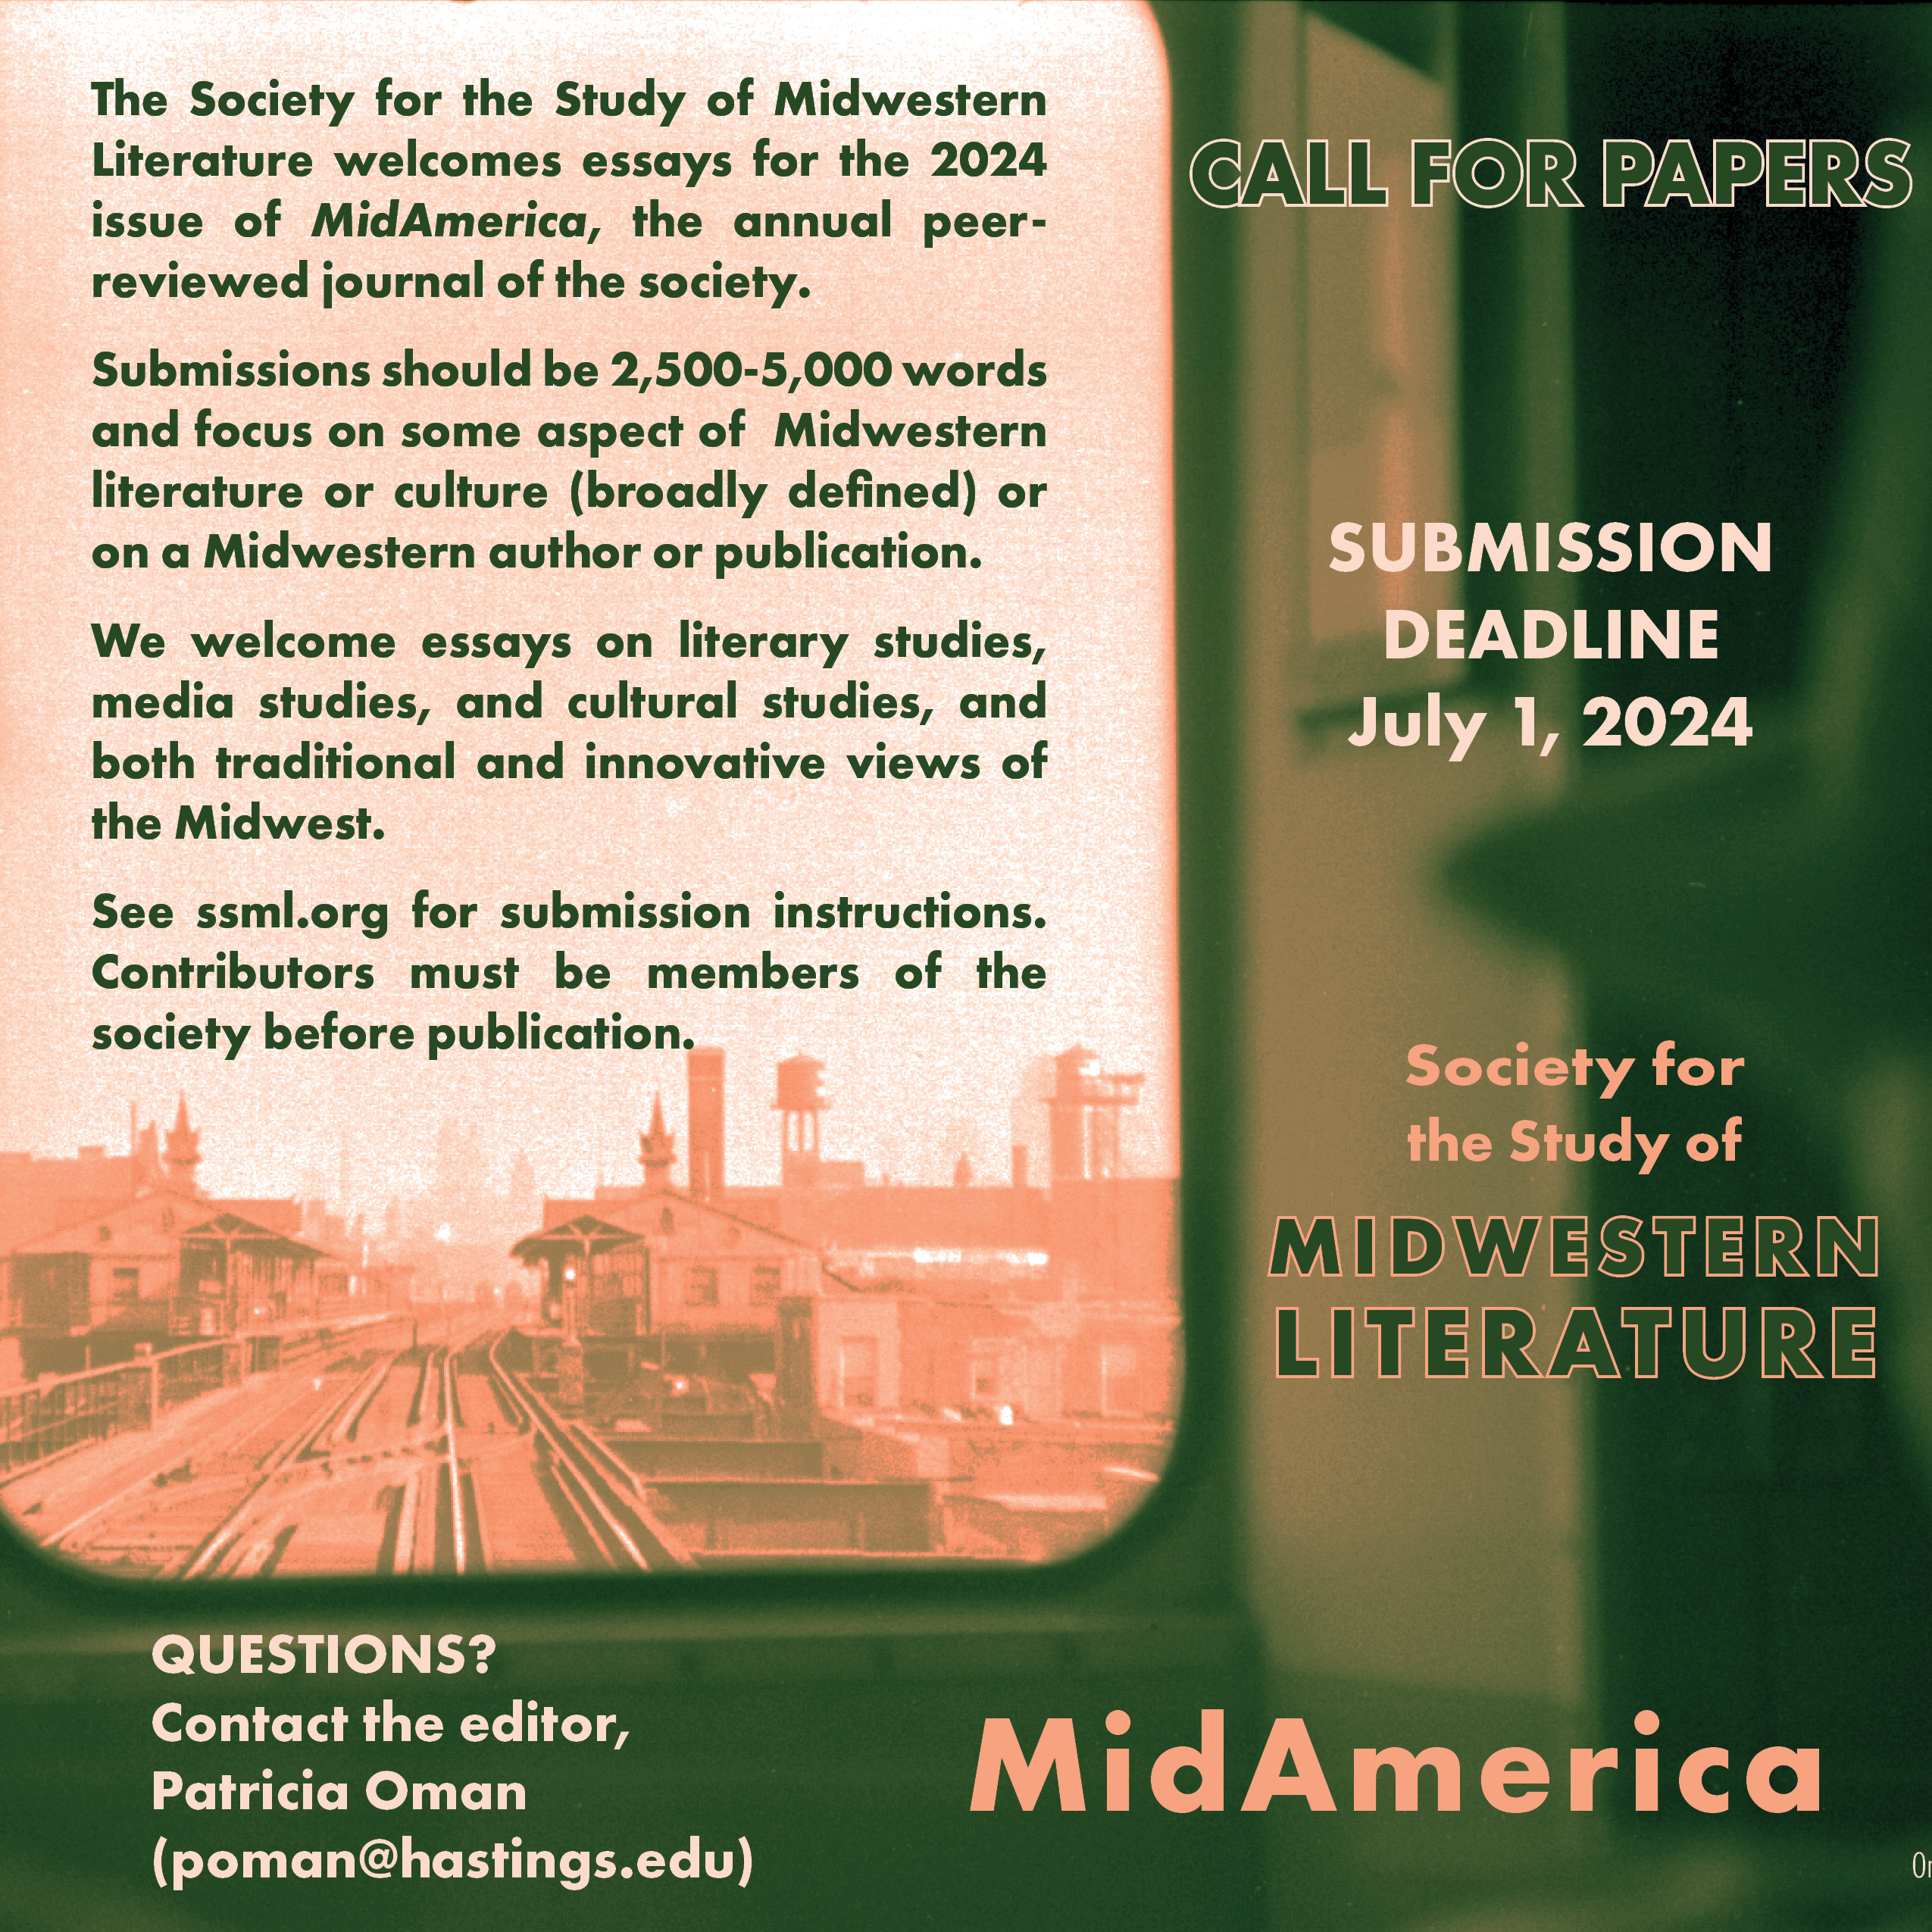 Call for papers for MidAmerica 2024. Deadline July 1, 2024.